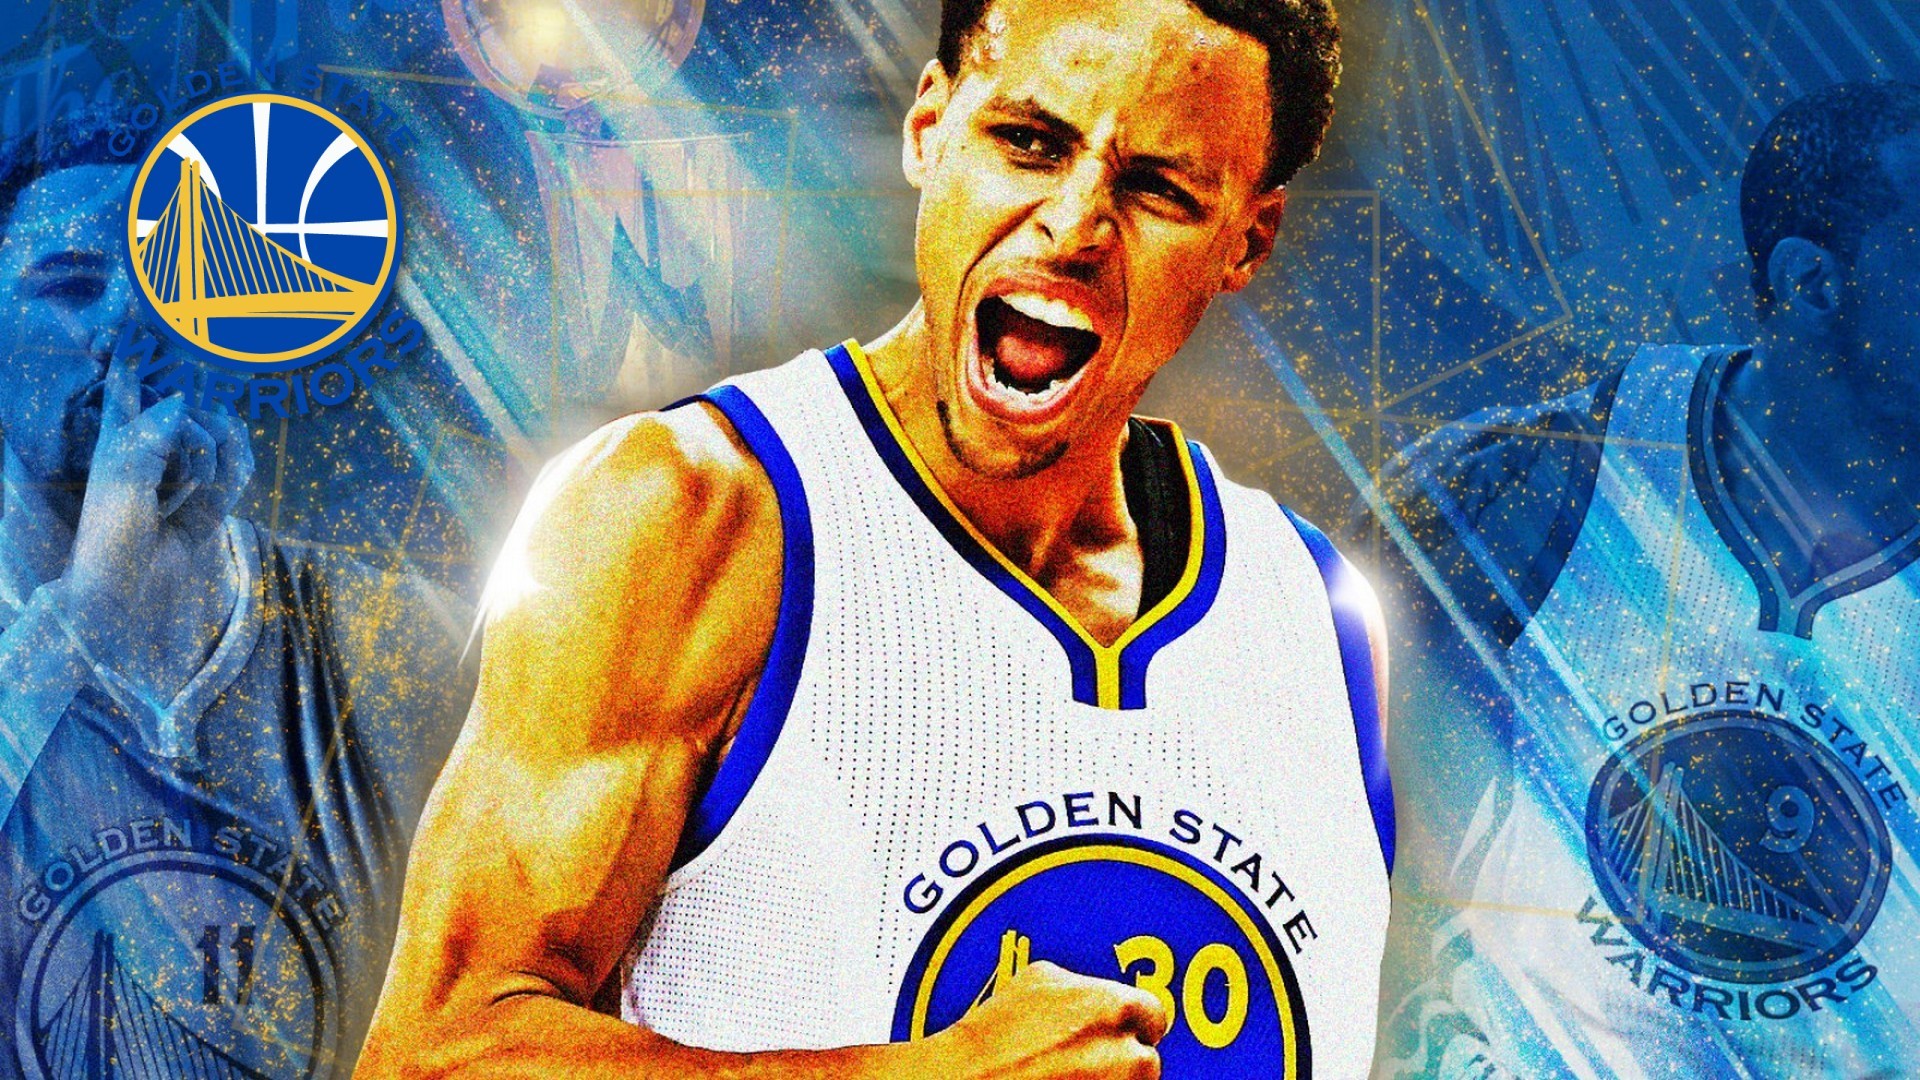 1920x1080 Stephen Curry Wallpaper with image dimensions  pixel. You can make  this wallpaper for your